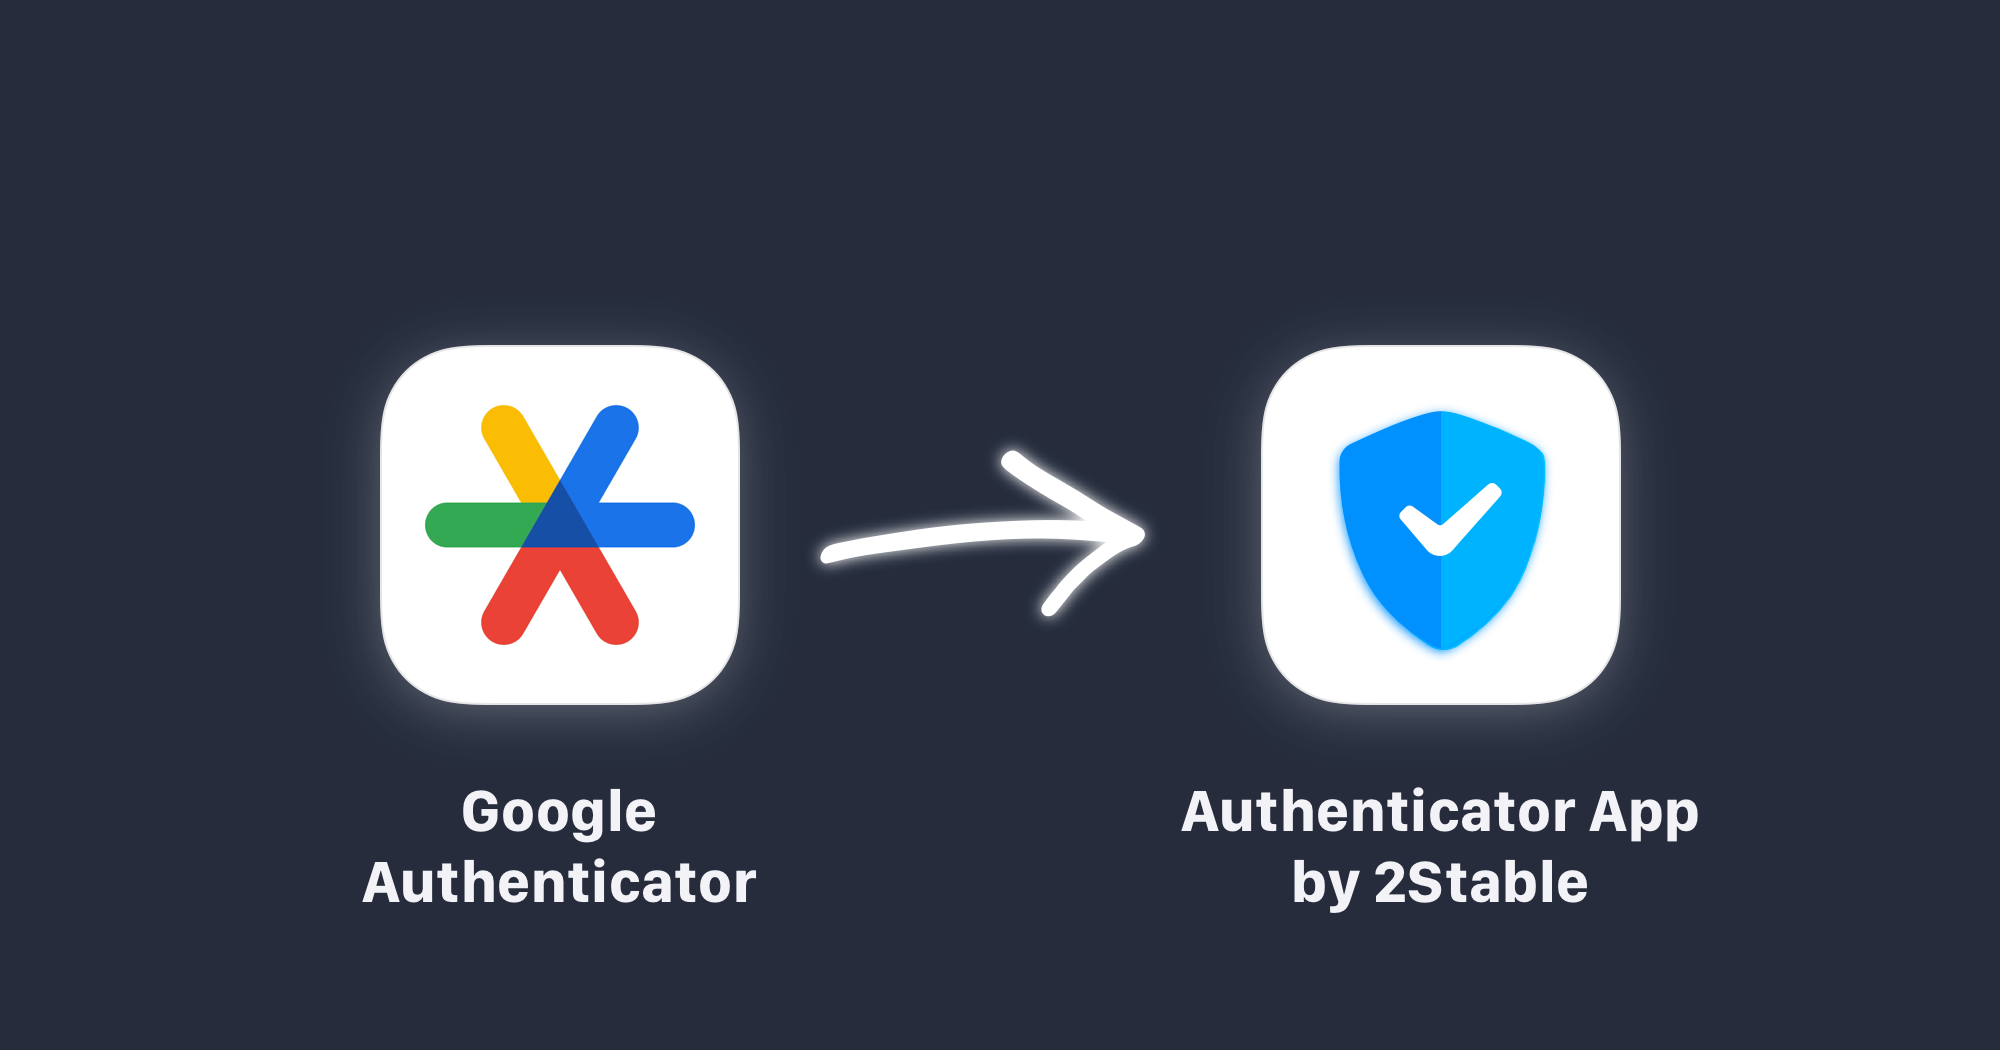 How to migrate all your 2FA codes from Google Authenticator